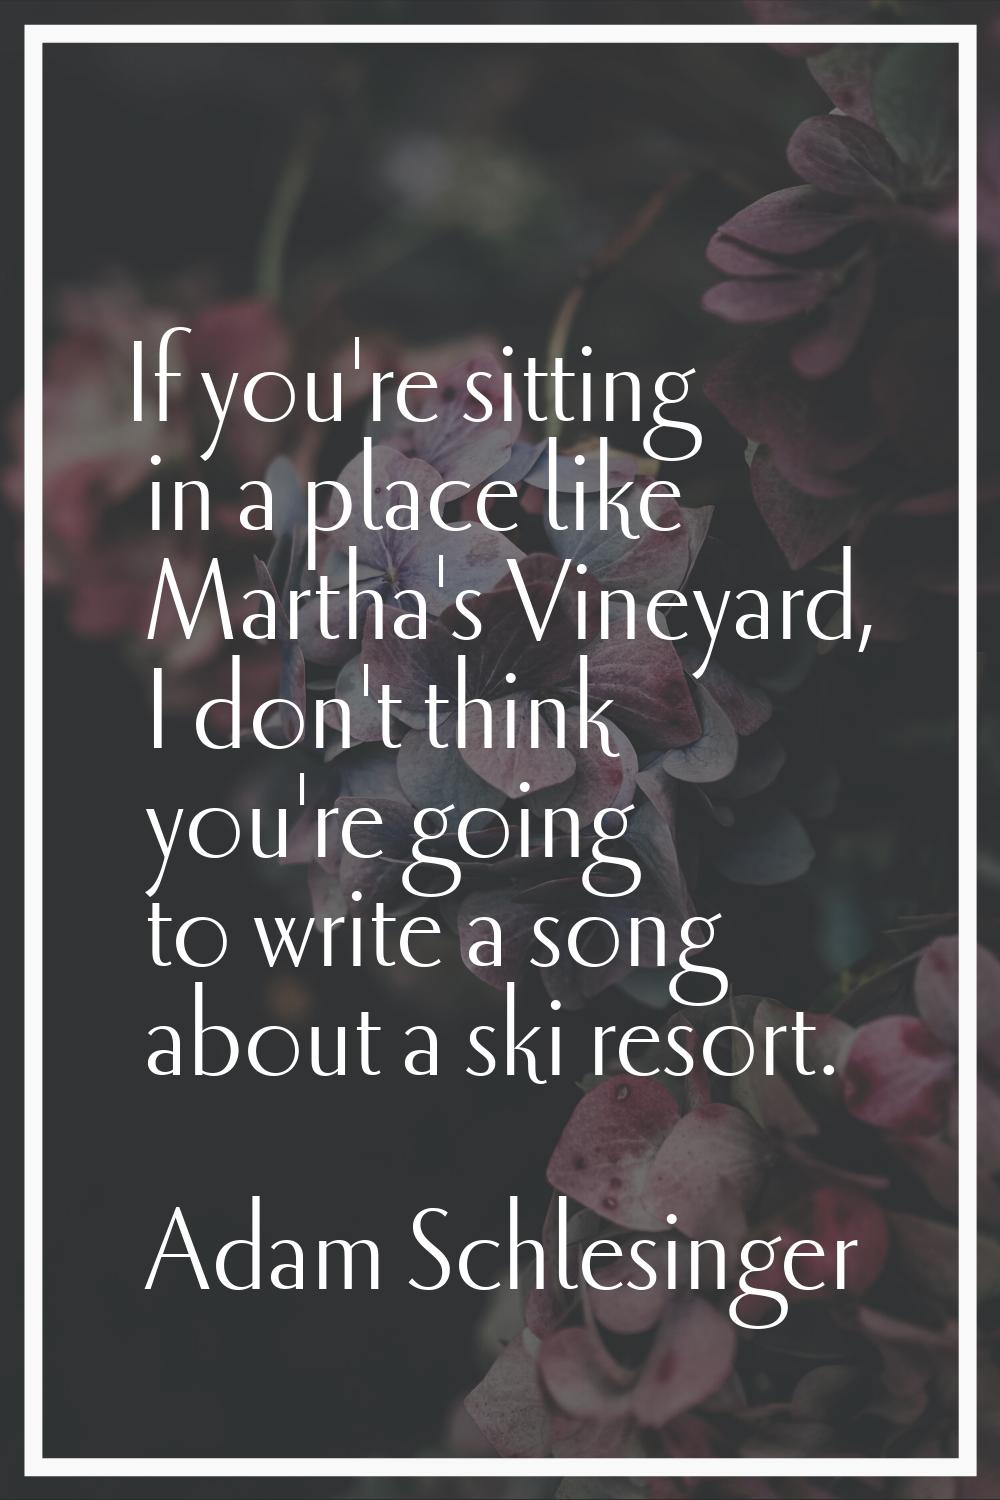 If you're sitting in a place like Martha's Vineyard, I don't think you're going to write a song abo